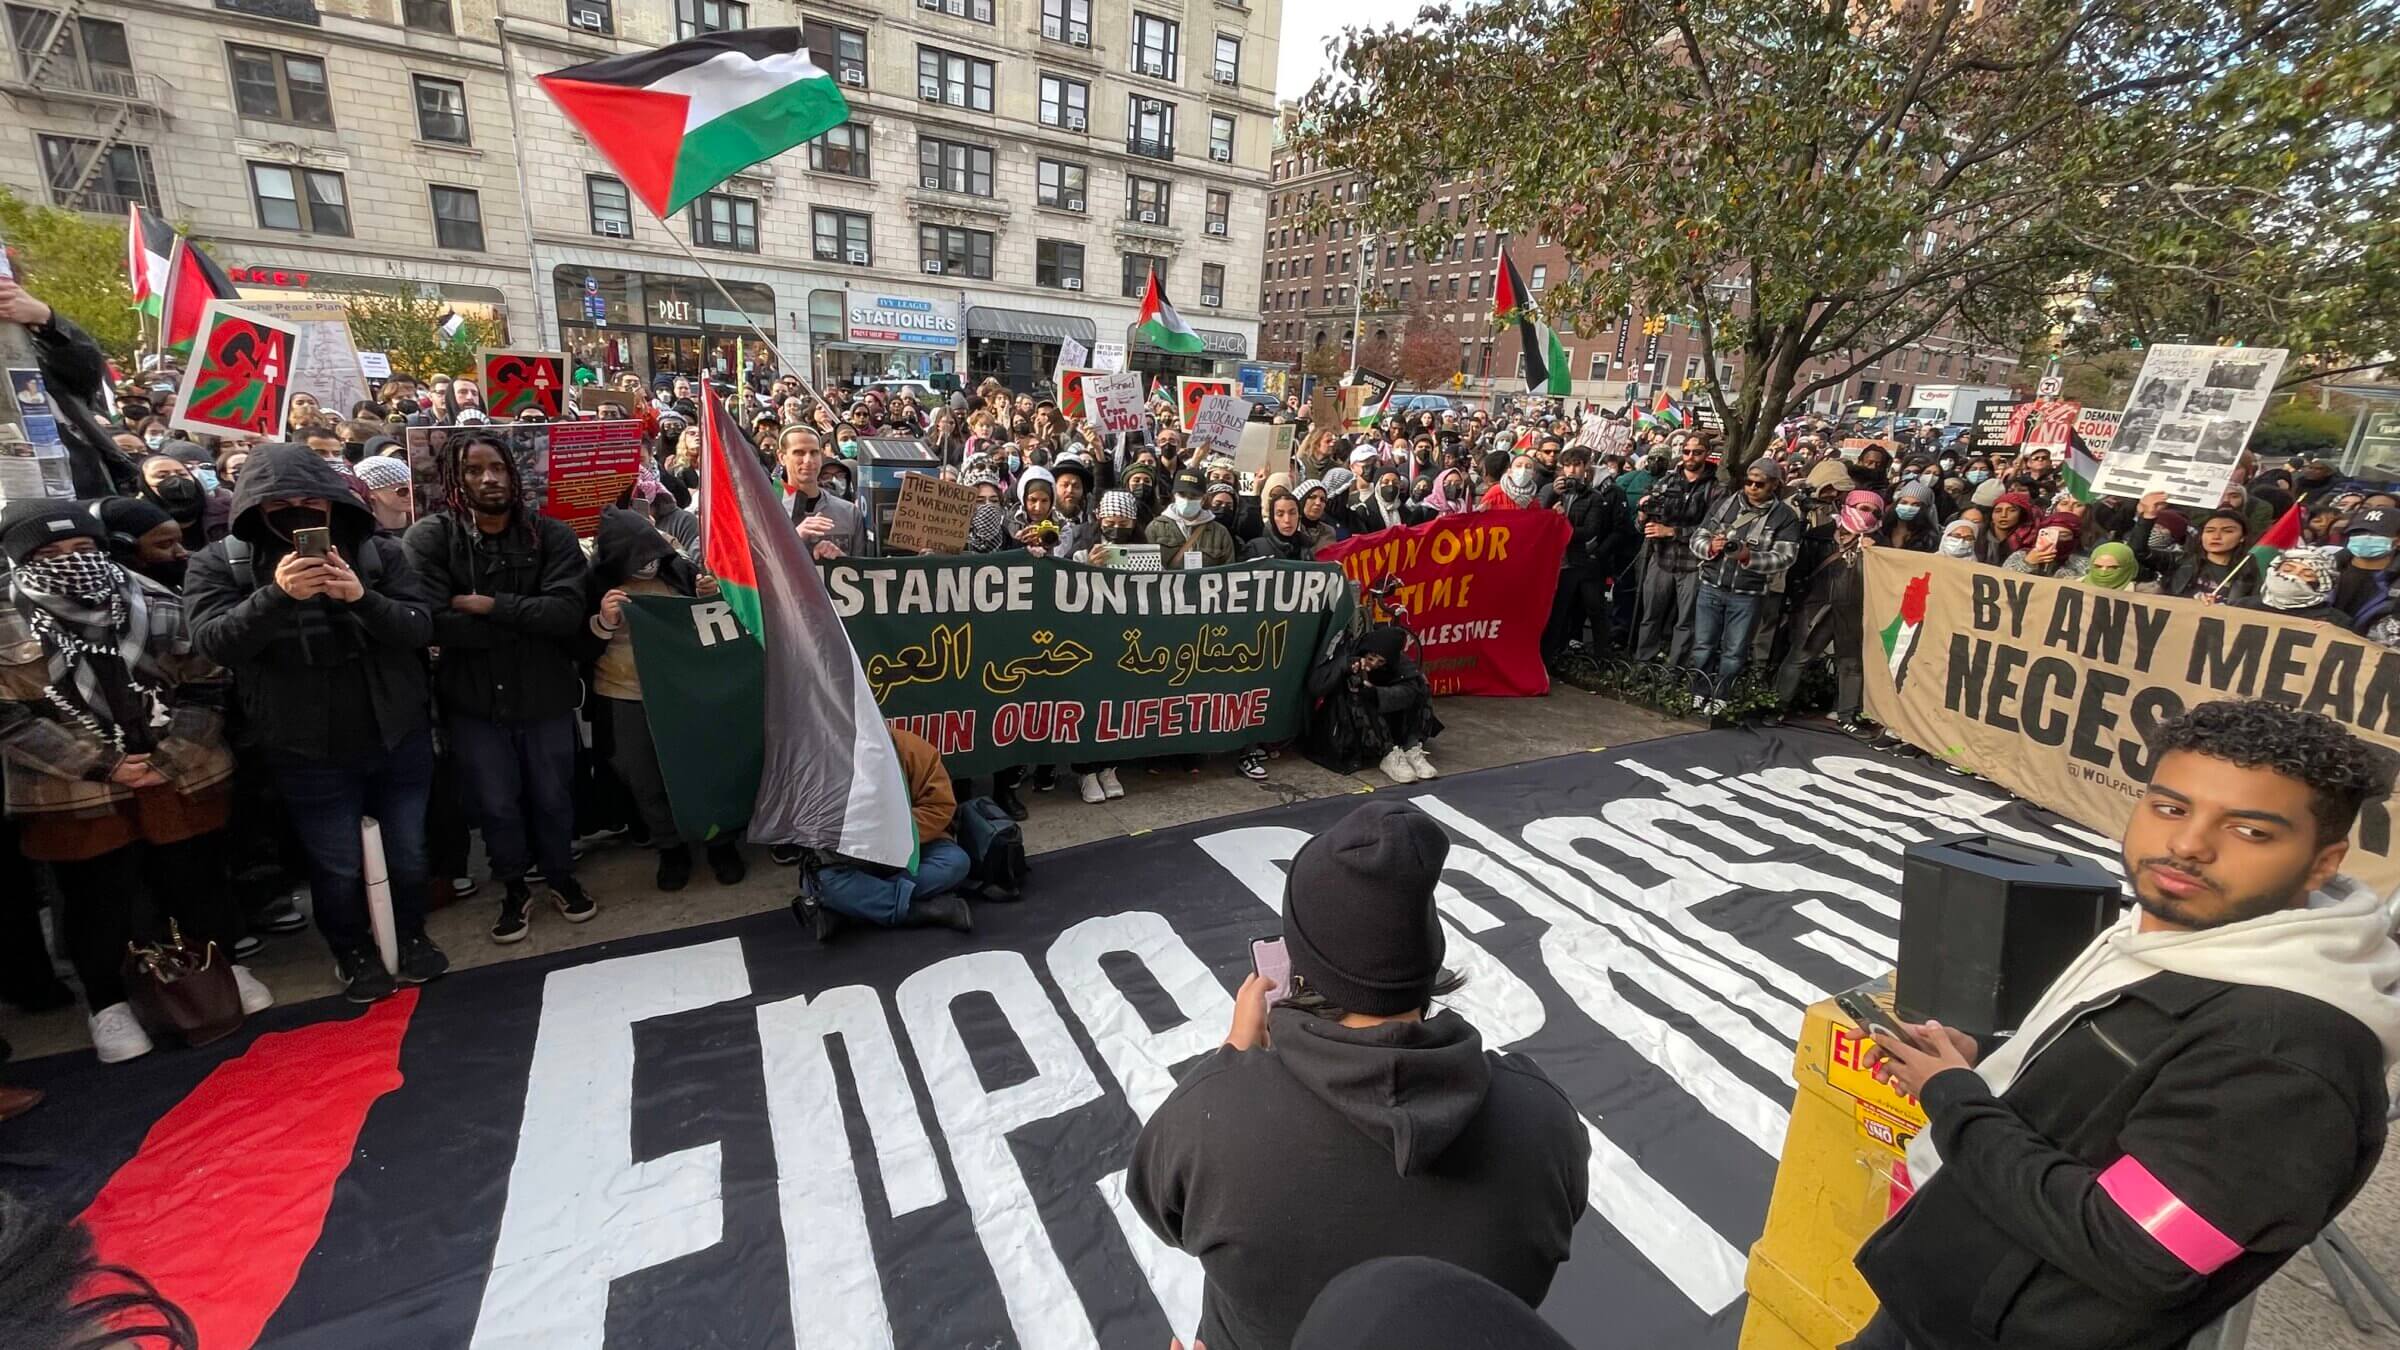 Columbia Suspends Pro-Palestine Groups for Unauthorized Event